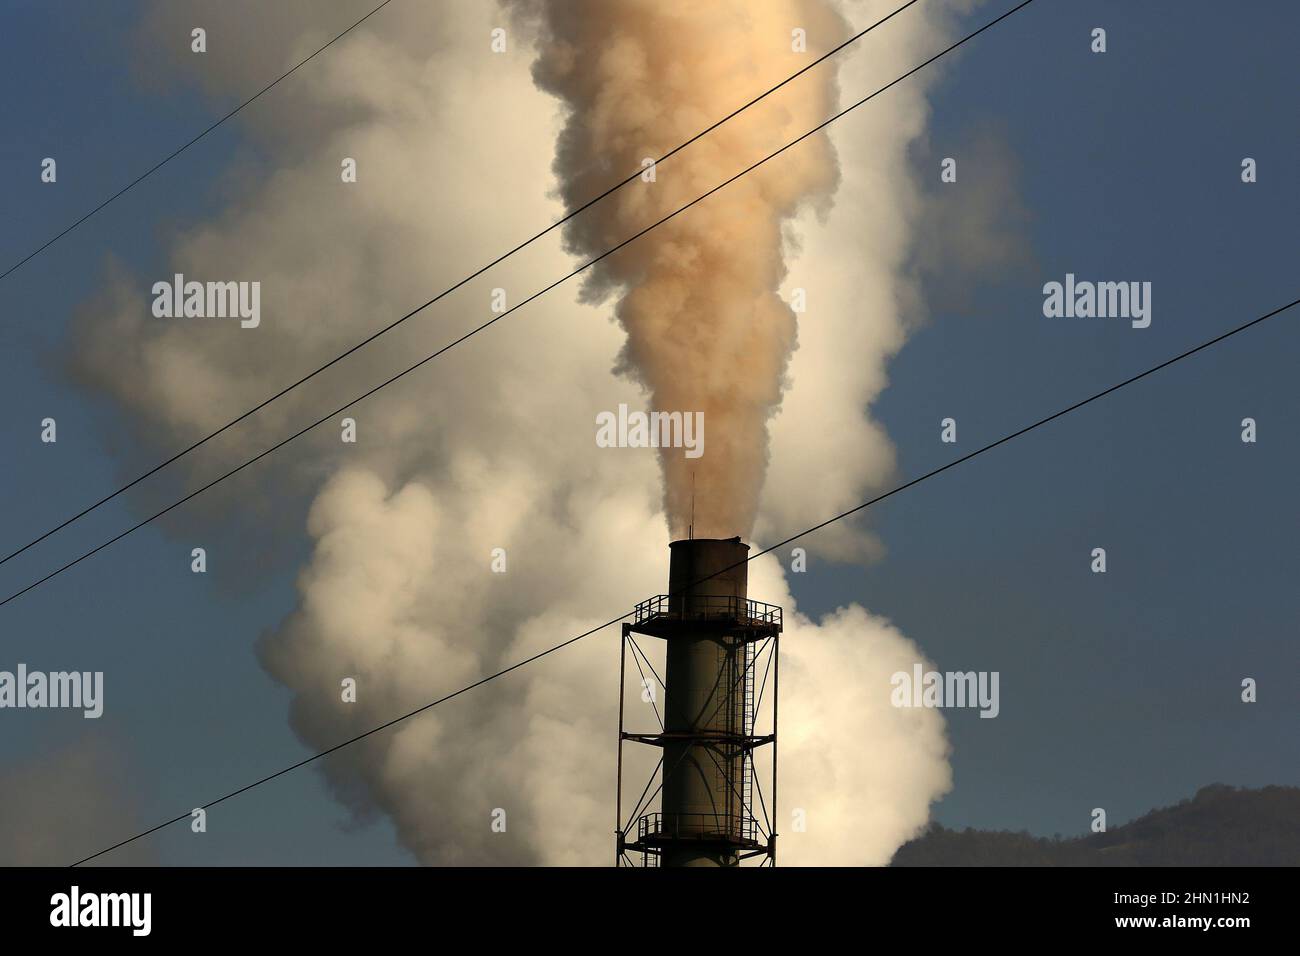 Heavy industry chimneys that produce smoke and fire. Air pollution illustration and damage to respiratory organs. Global warming and coal industry Stock Photo